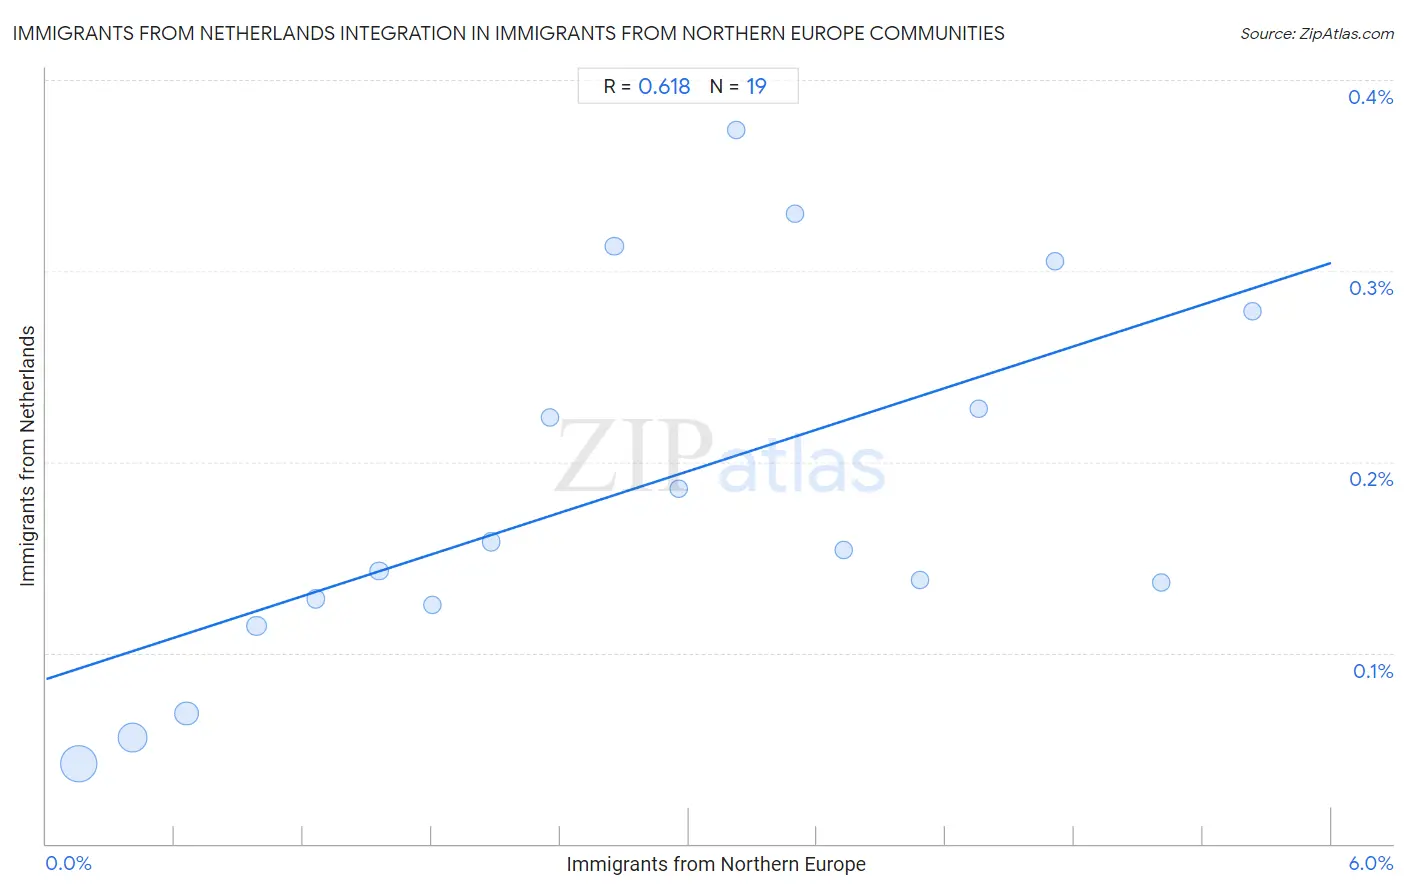 Immigrants from Northern Europe Integration in Immigrants from Netherlands Communities